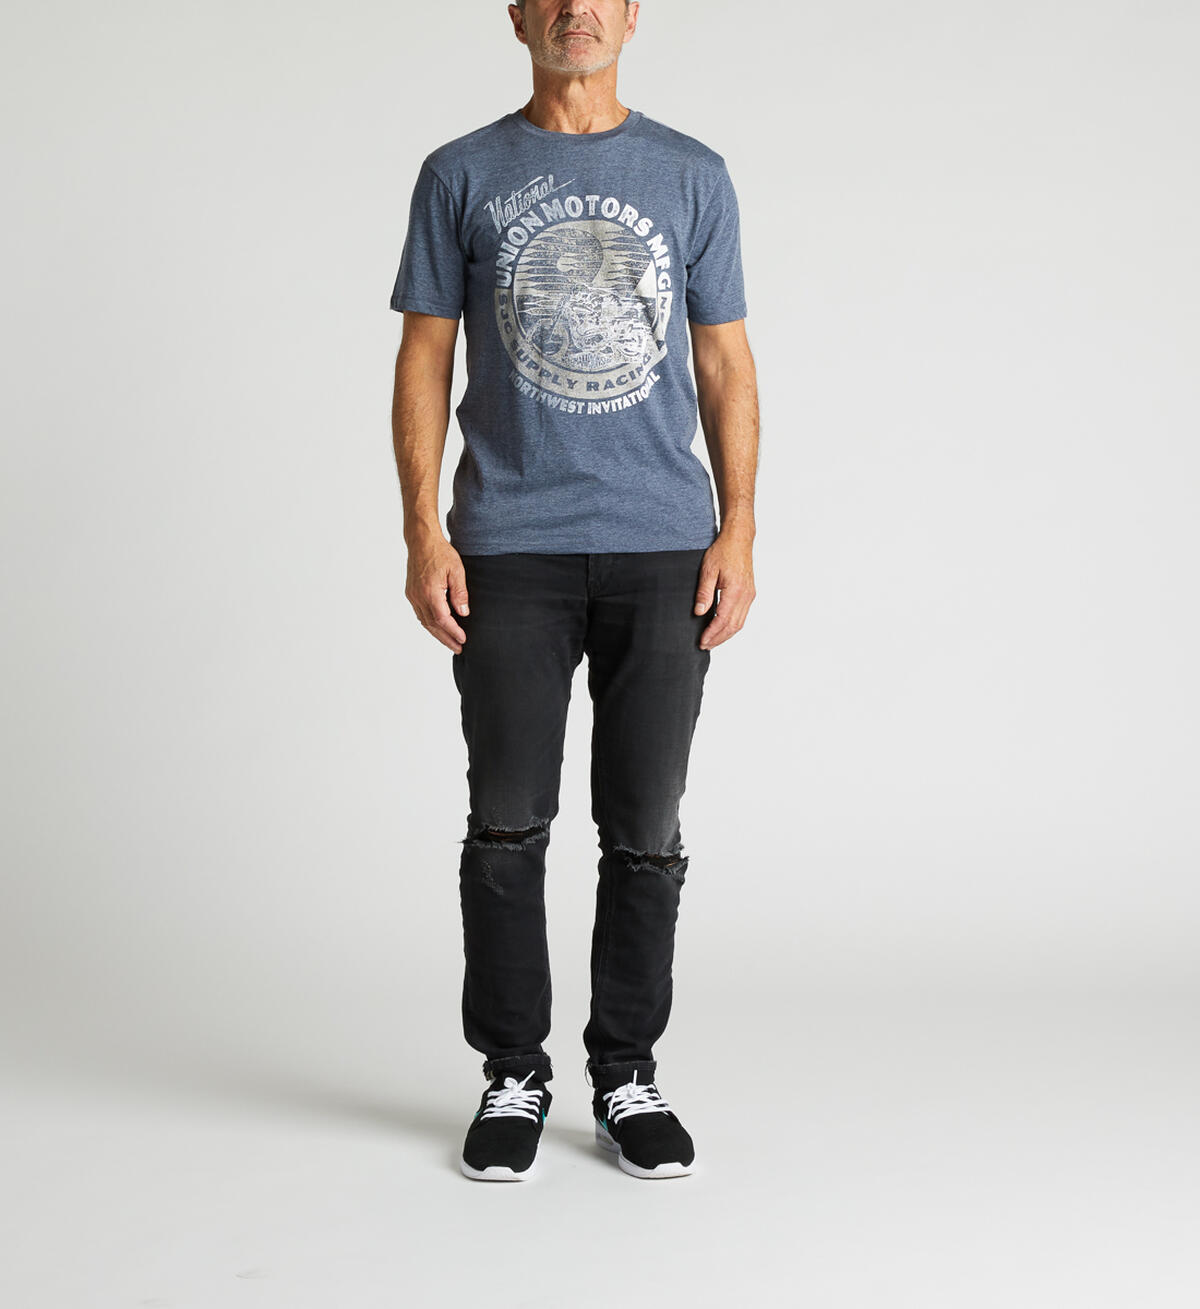 Dash Short-Sleeve Graphic Tee, , hi-res image number 1